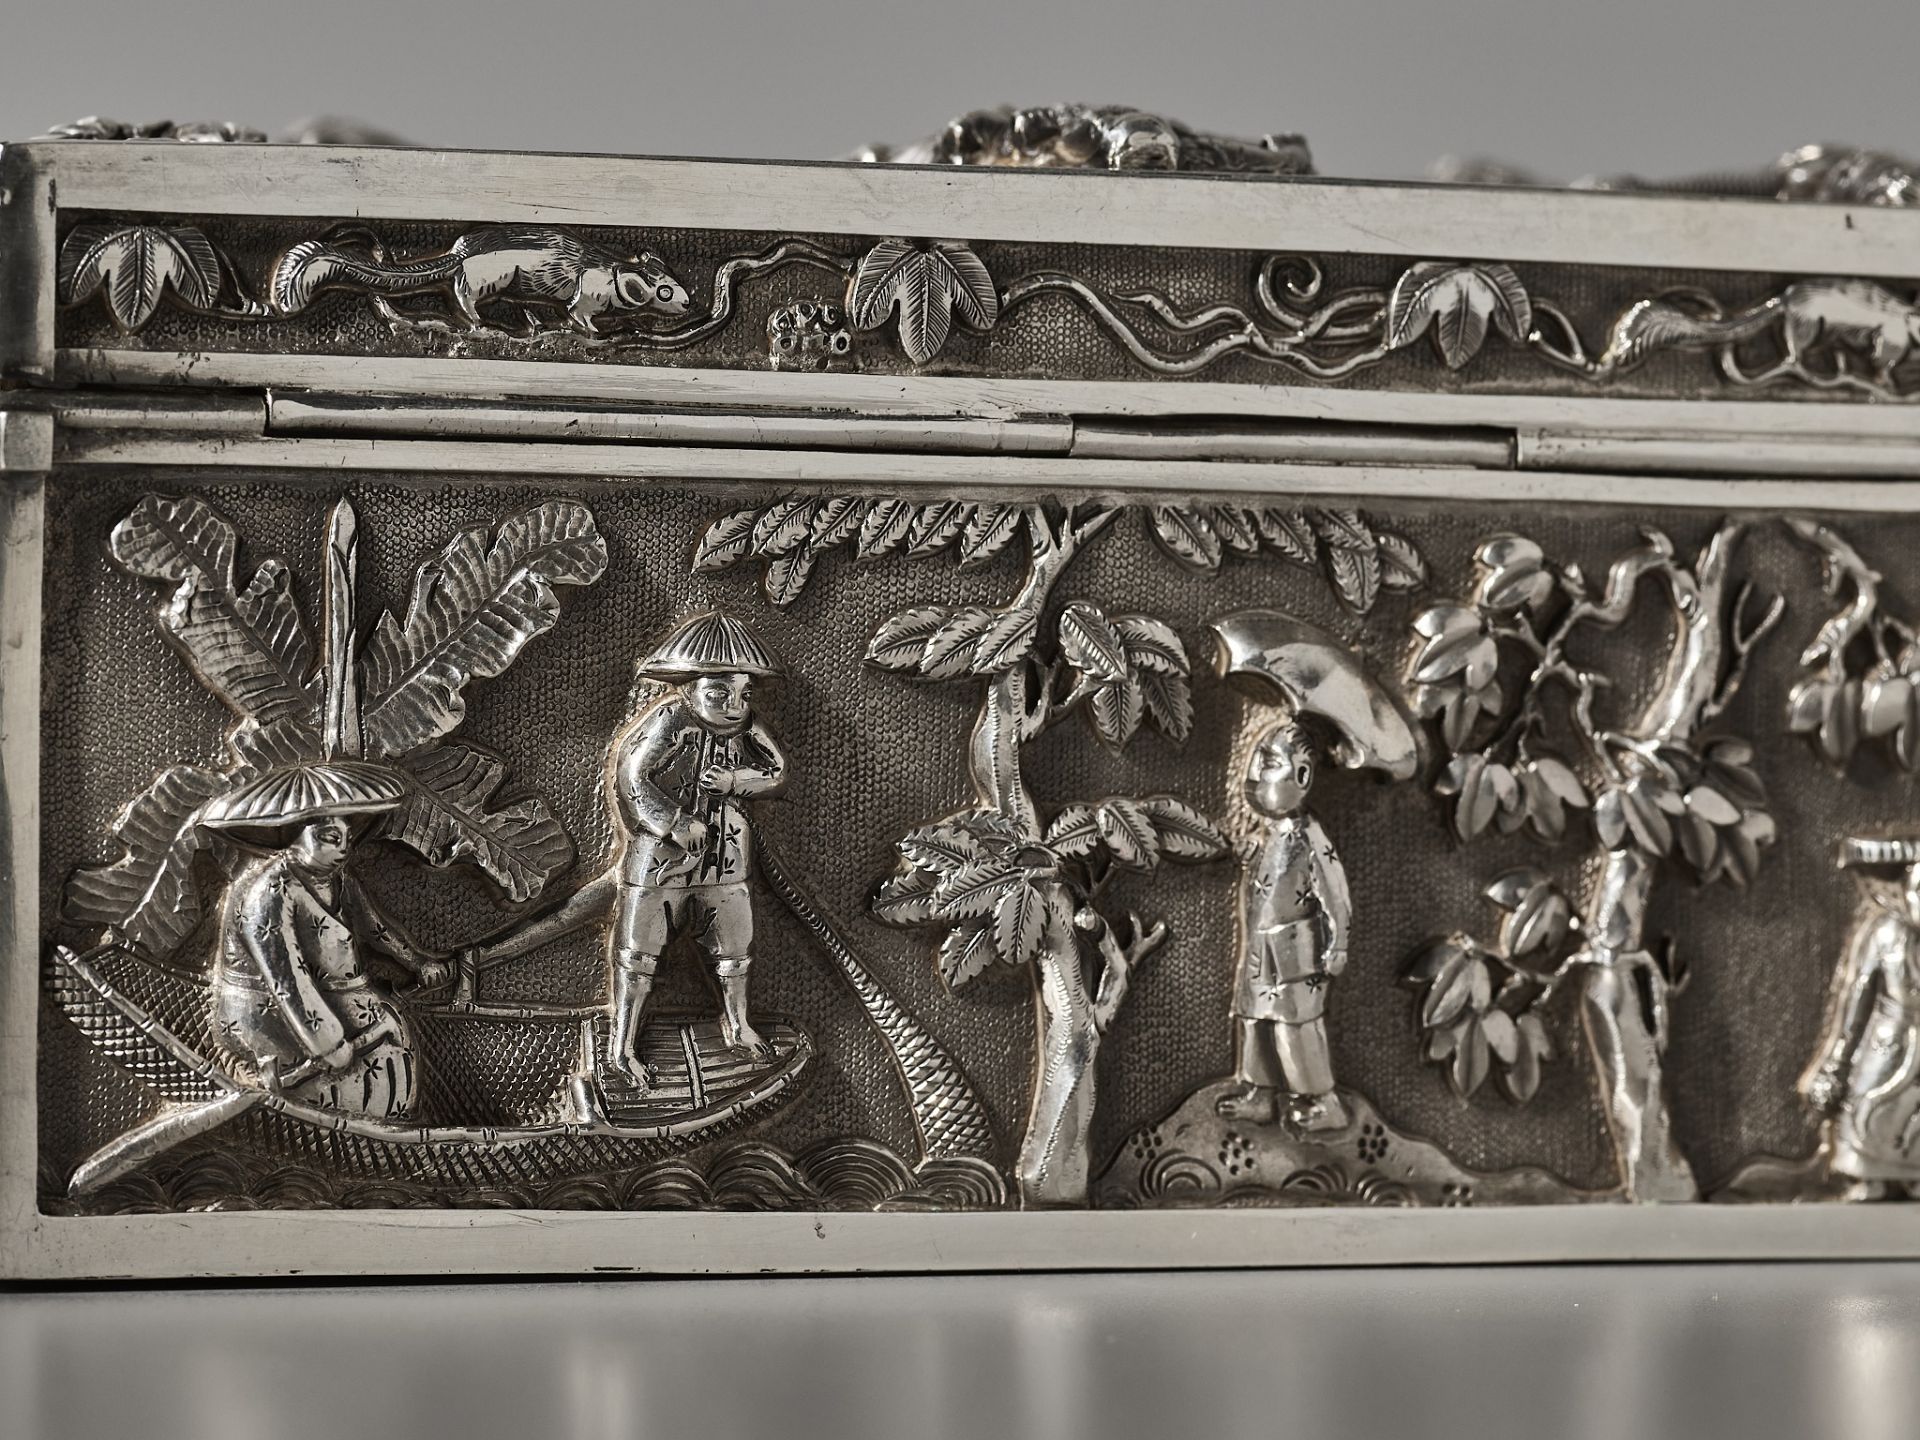 AN EXPORT SILVER REPOUSSE CIGAR BOX AND COVER, TONG YI MARK, LATE QING DYNASTY - Image 22 of 22